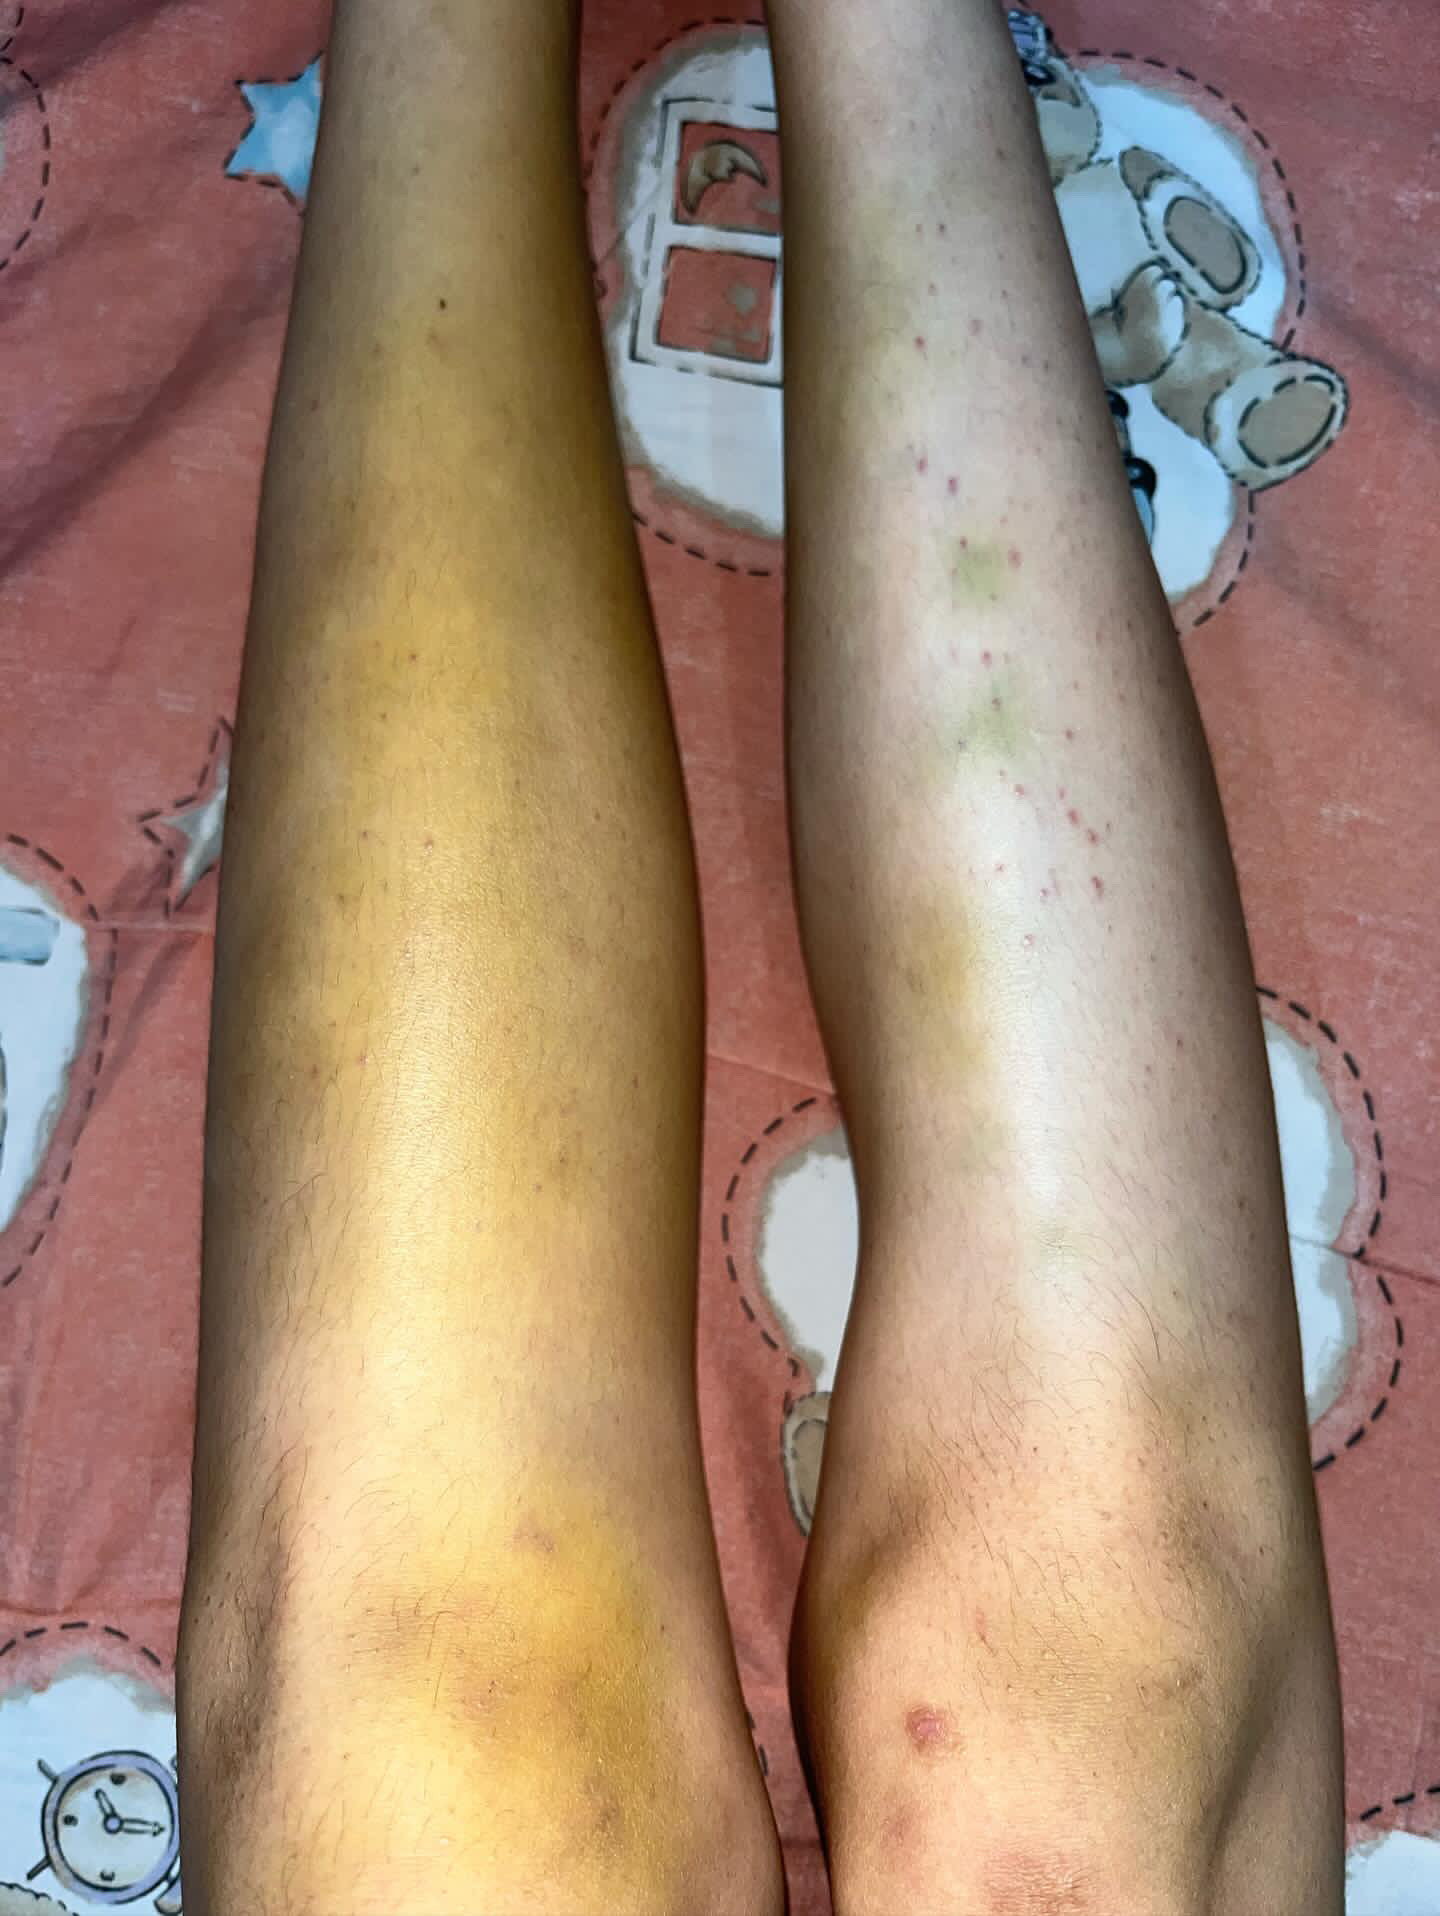 Fion's bruises after falling down due to anorexia